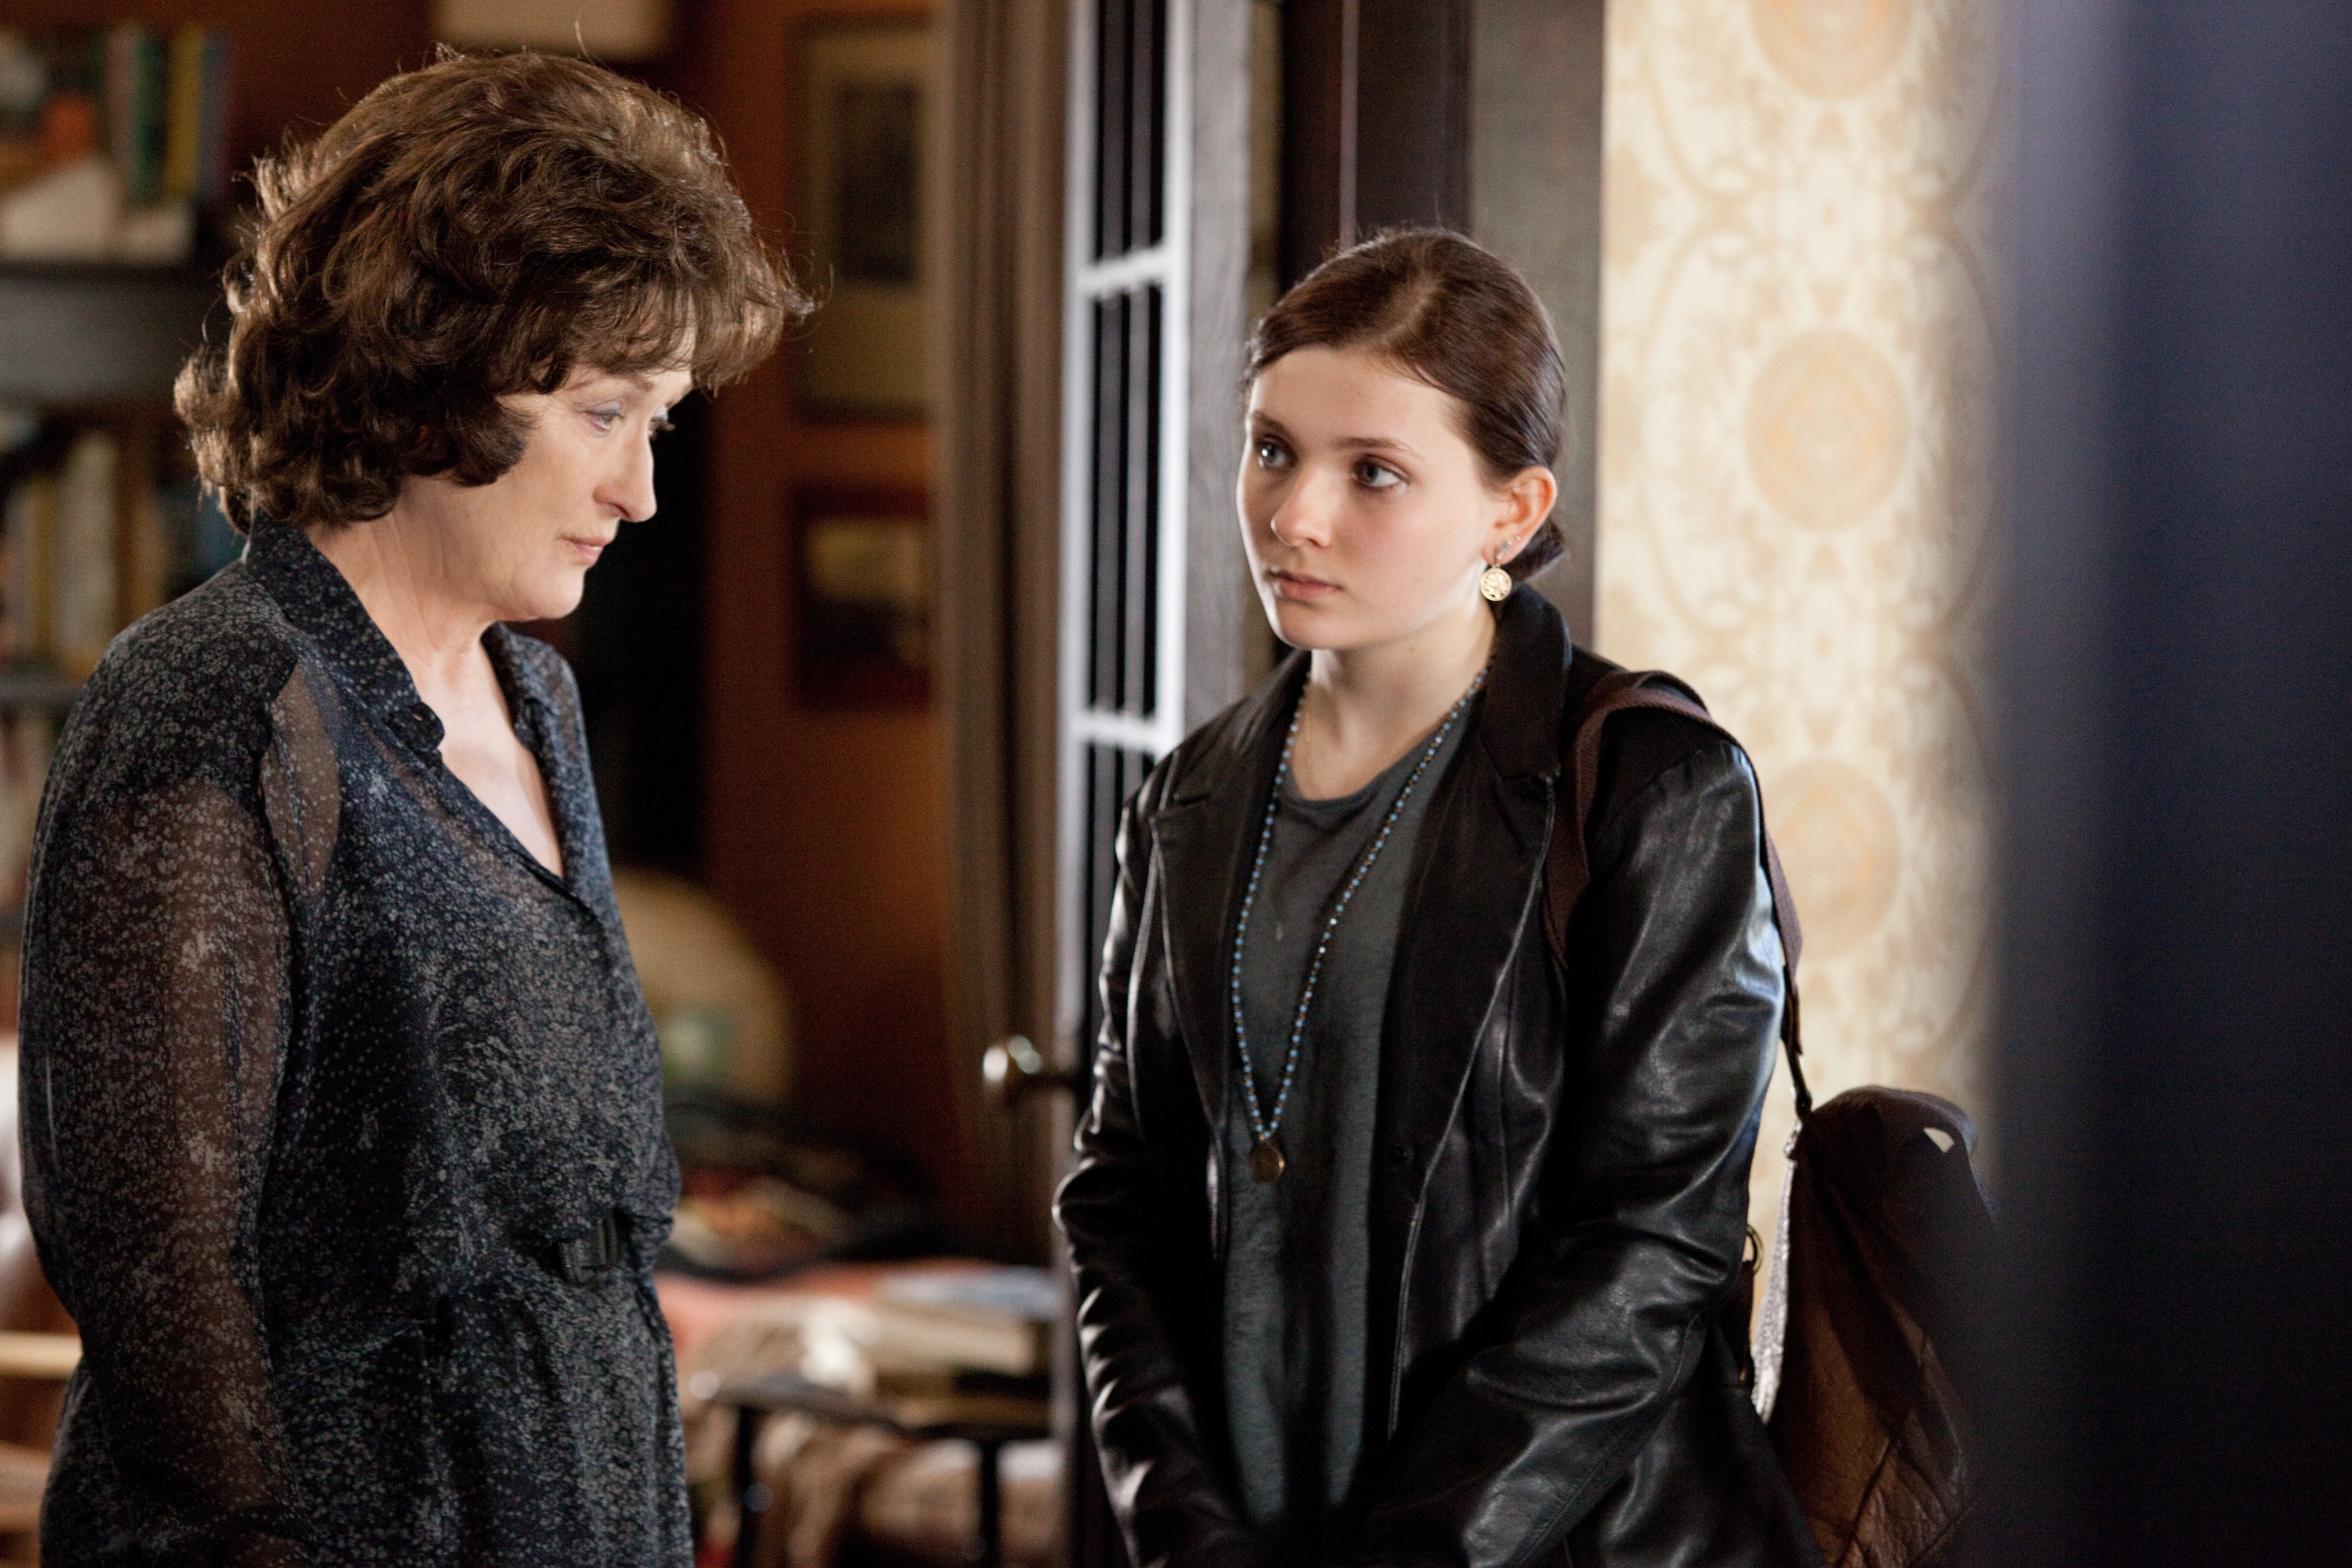 Streep stares down her granddaughter (Abigail Breslin) in August: Osage County.